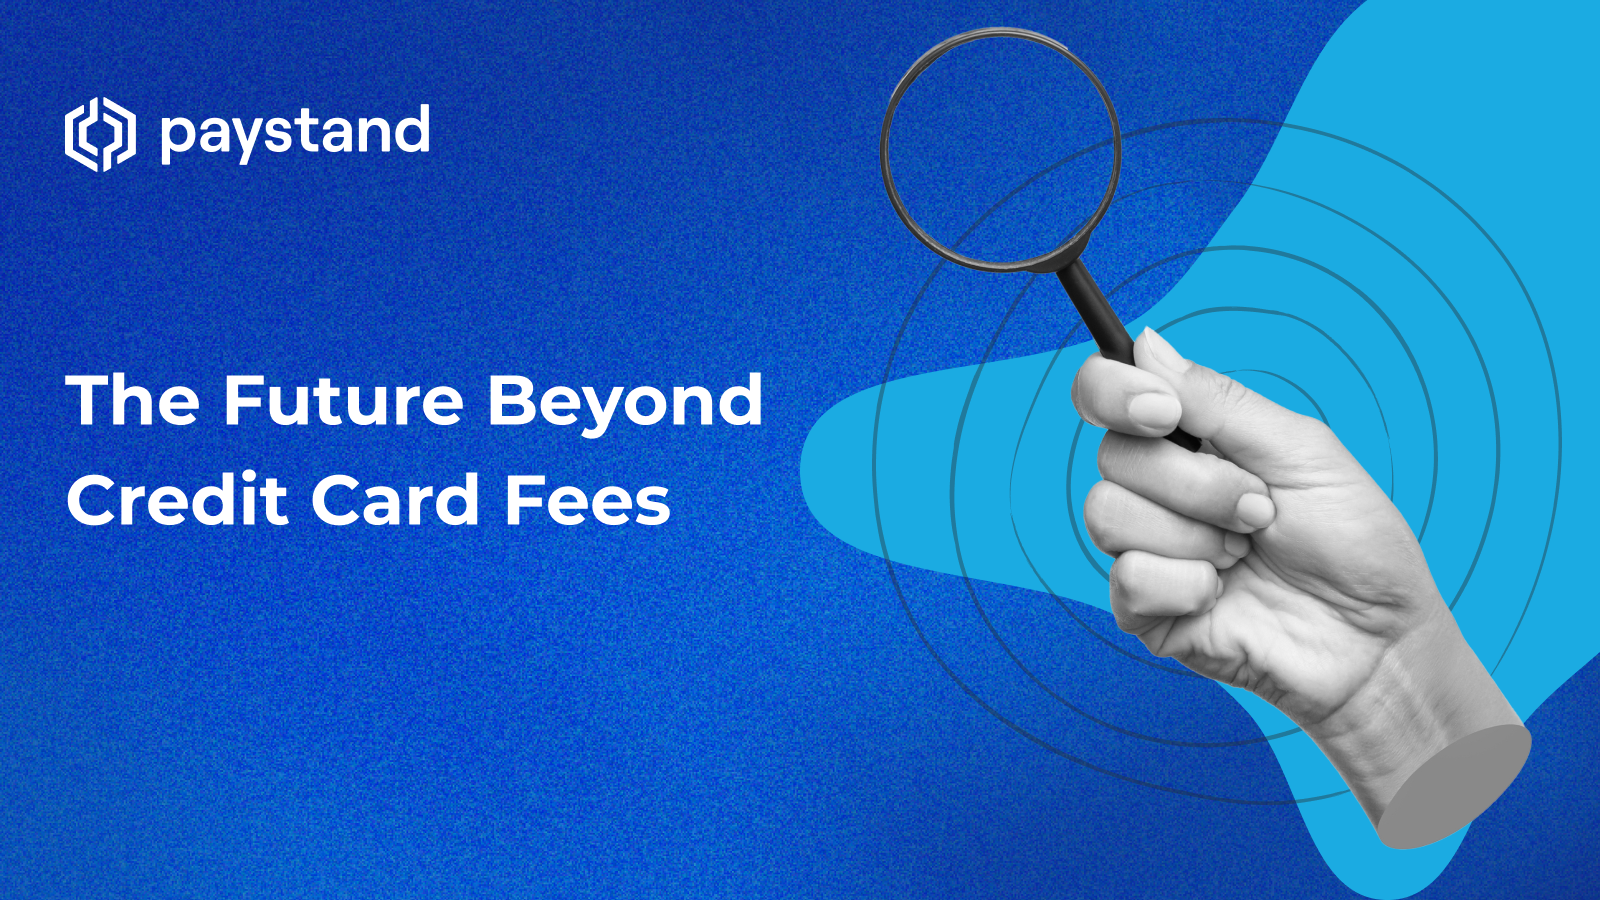 The Future Beyond Credit Card Fees